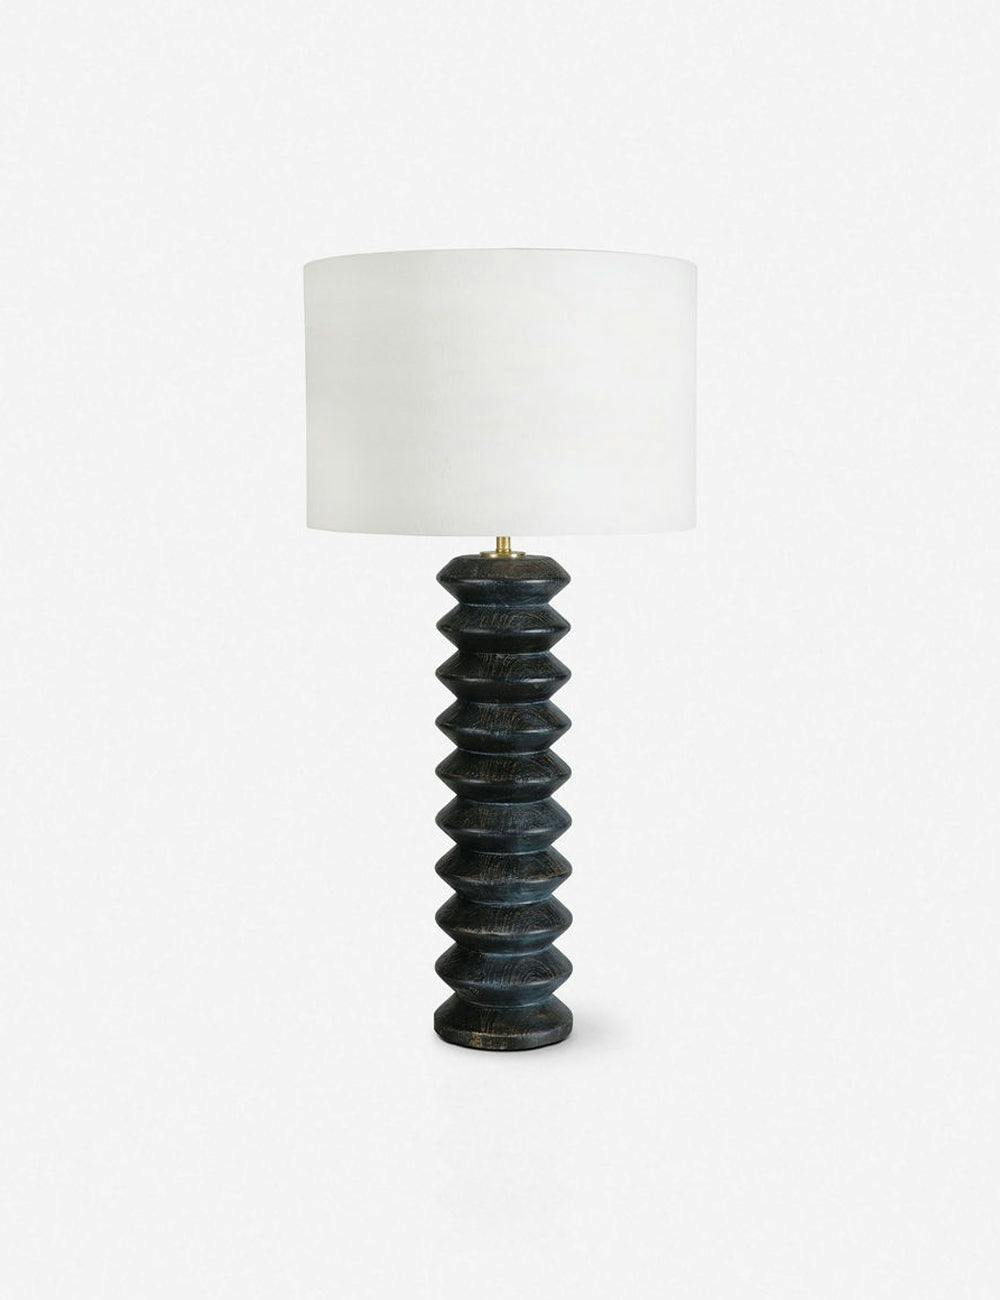 Ebony and Polished Brass Accordion Table Lamp with Linen Shade